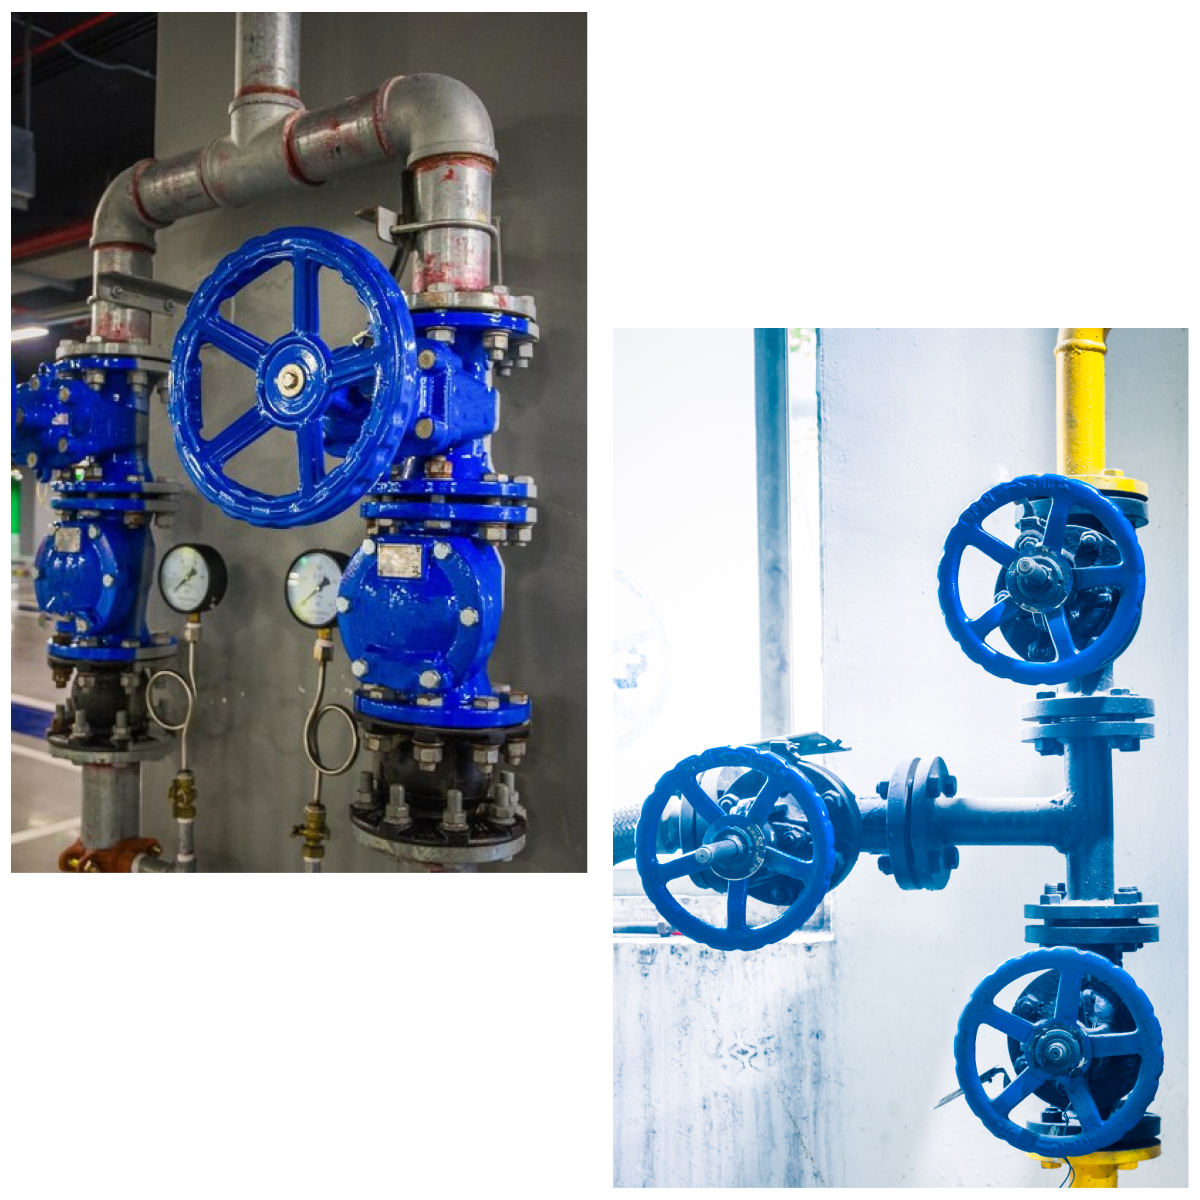 A collage of industrial gate valves from AlterValve.